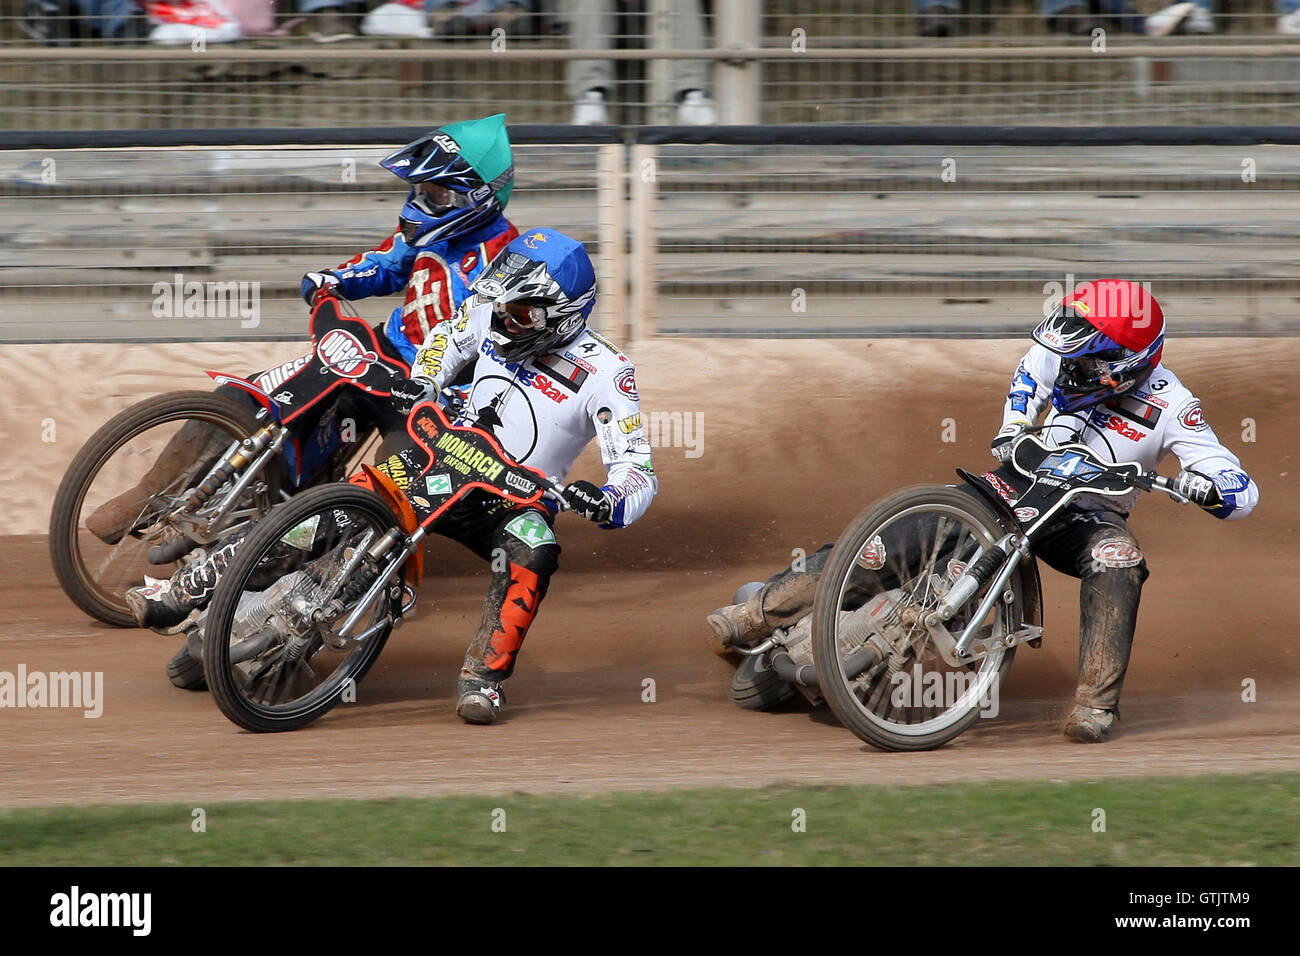 Heat 5: Andreas Jonsson (green) moves to overtake Steve Johnston (blue) - Ipswich Witches vs Lakeside Hammers - Craven Shield Speedway at Foxhall Stadium, Ipswich - 21/03/08 Stock Photo